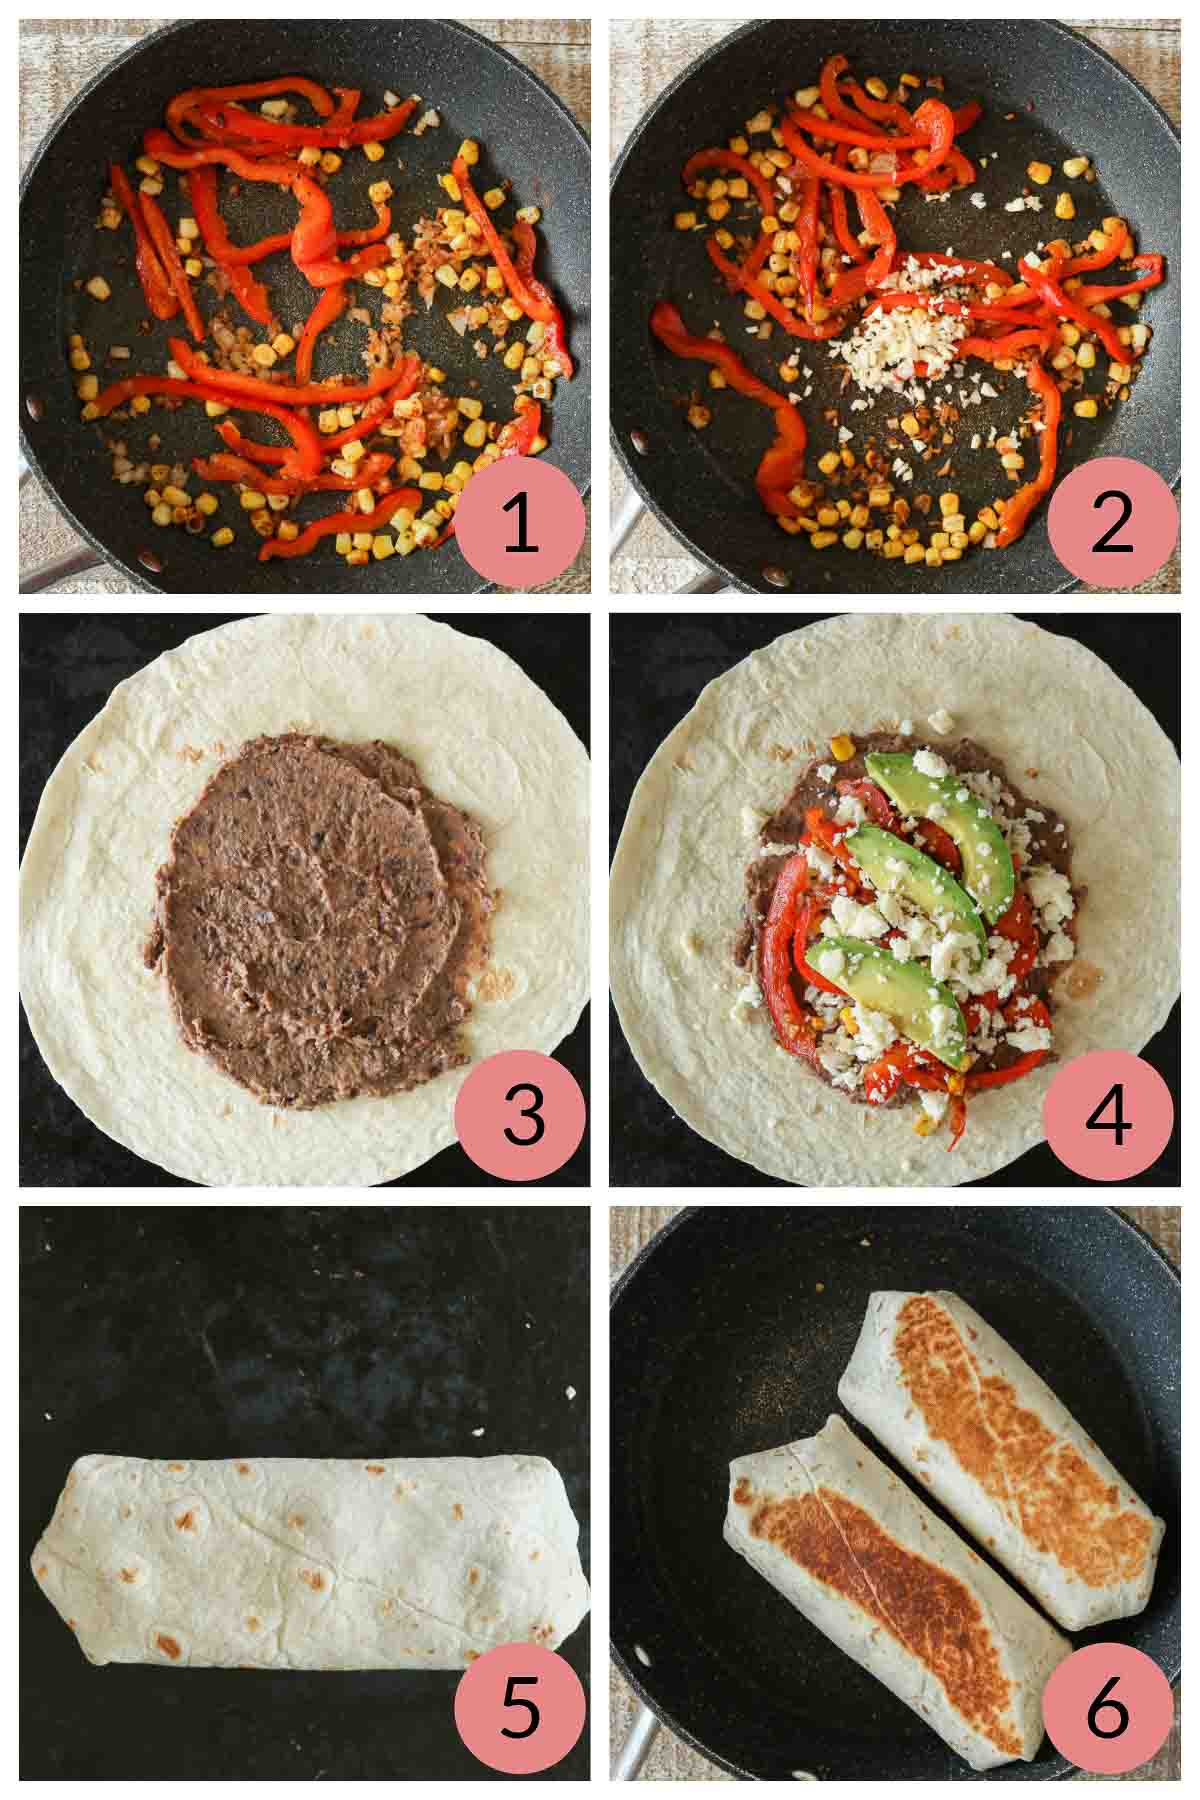 Collage of steps to make a burrito with refried beans, veggies, avocado and cheese.